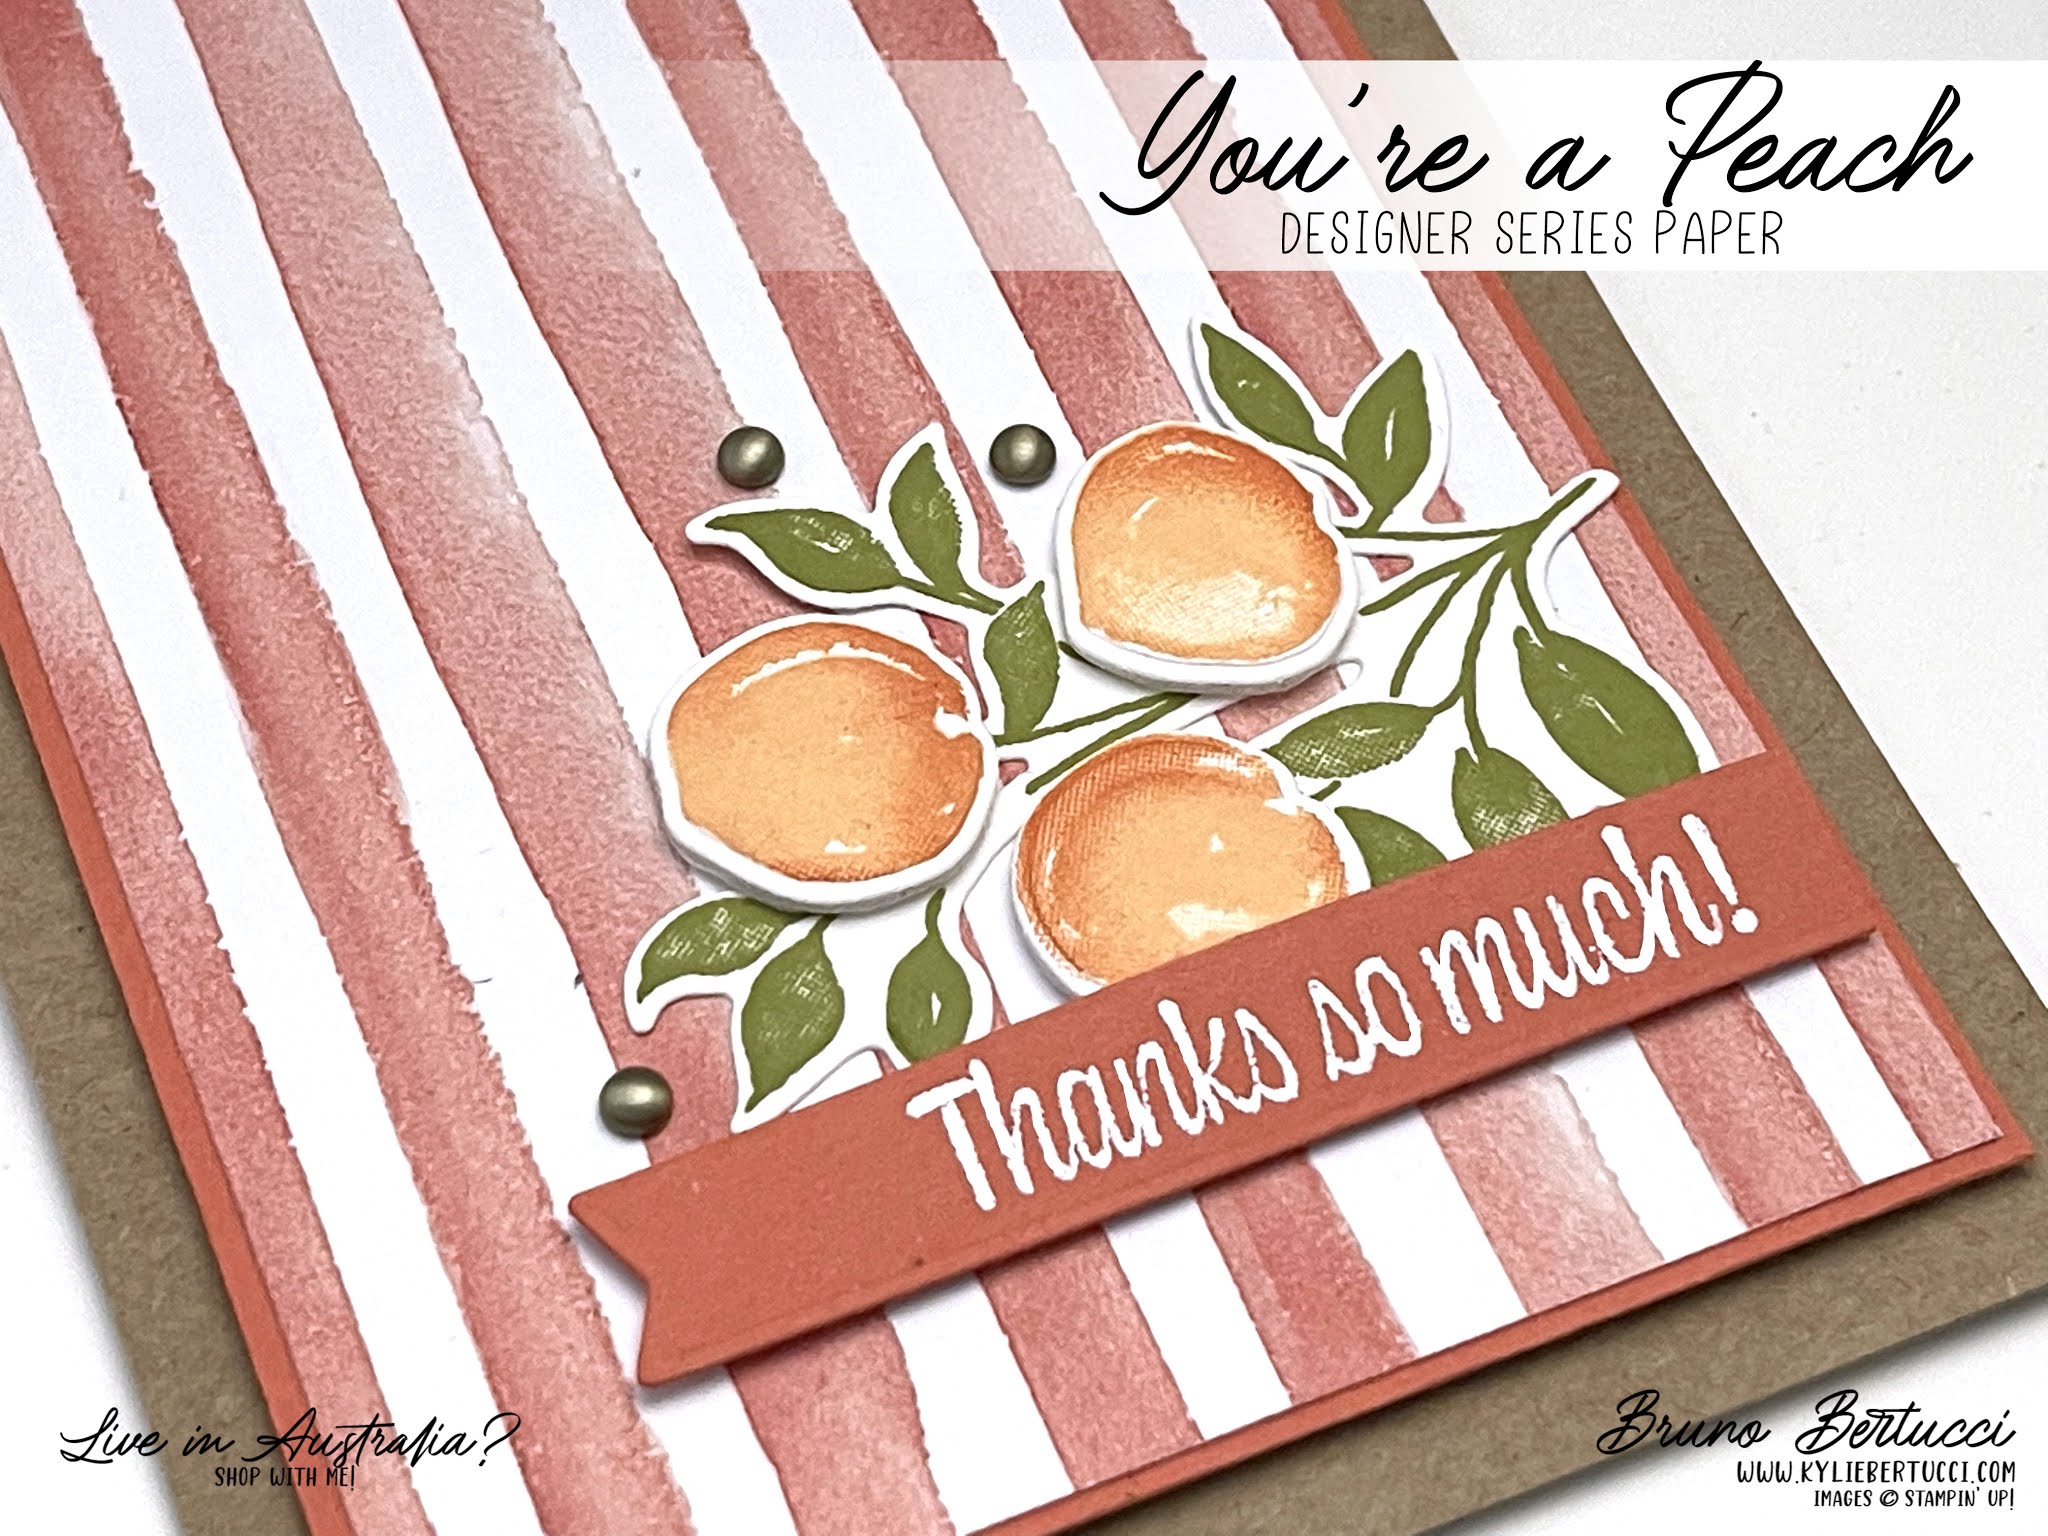 How To Use Embossing Powder - Queen Pip Cards